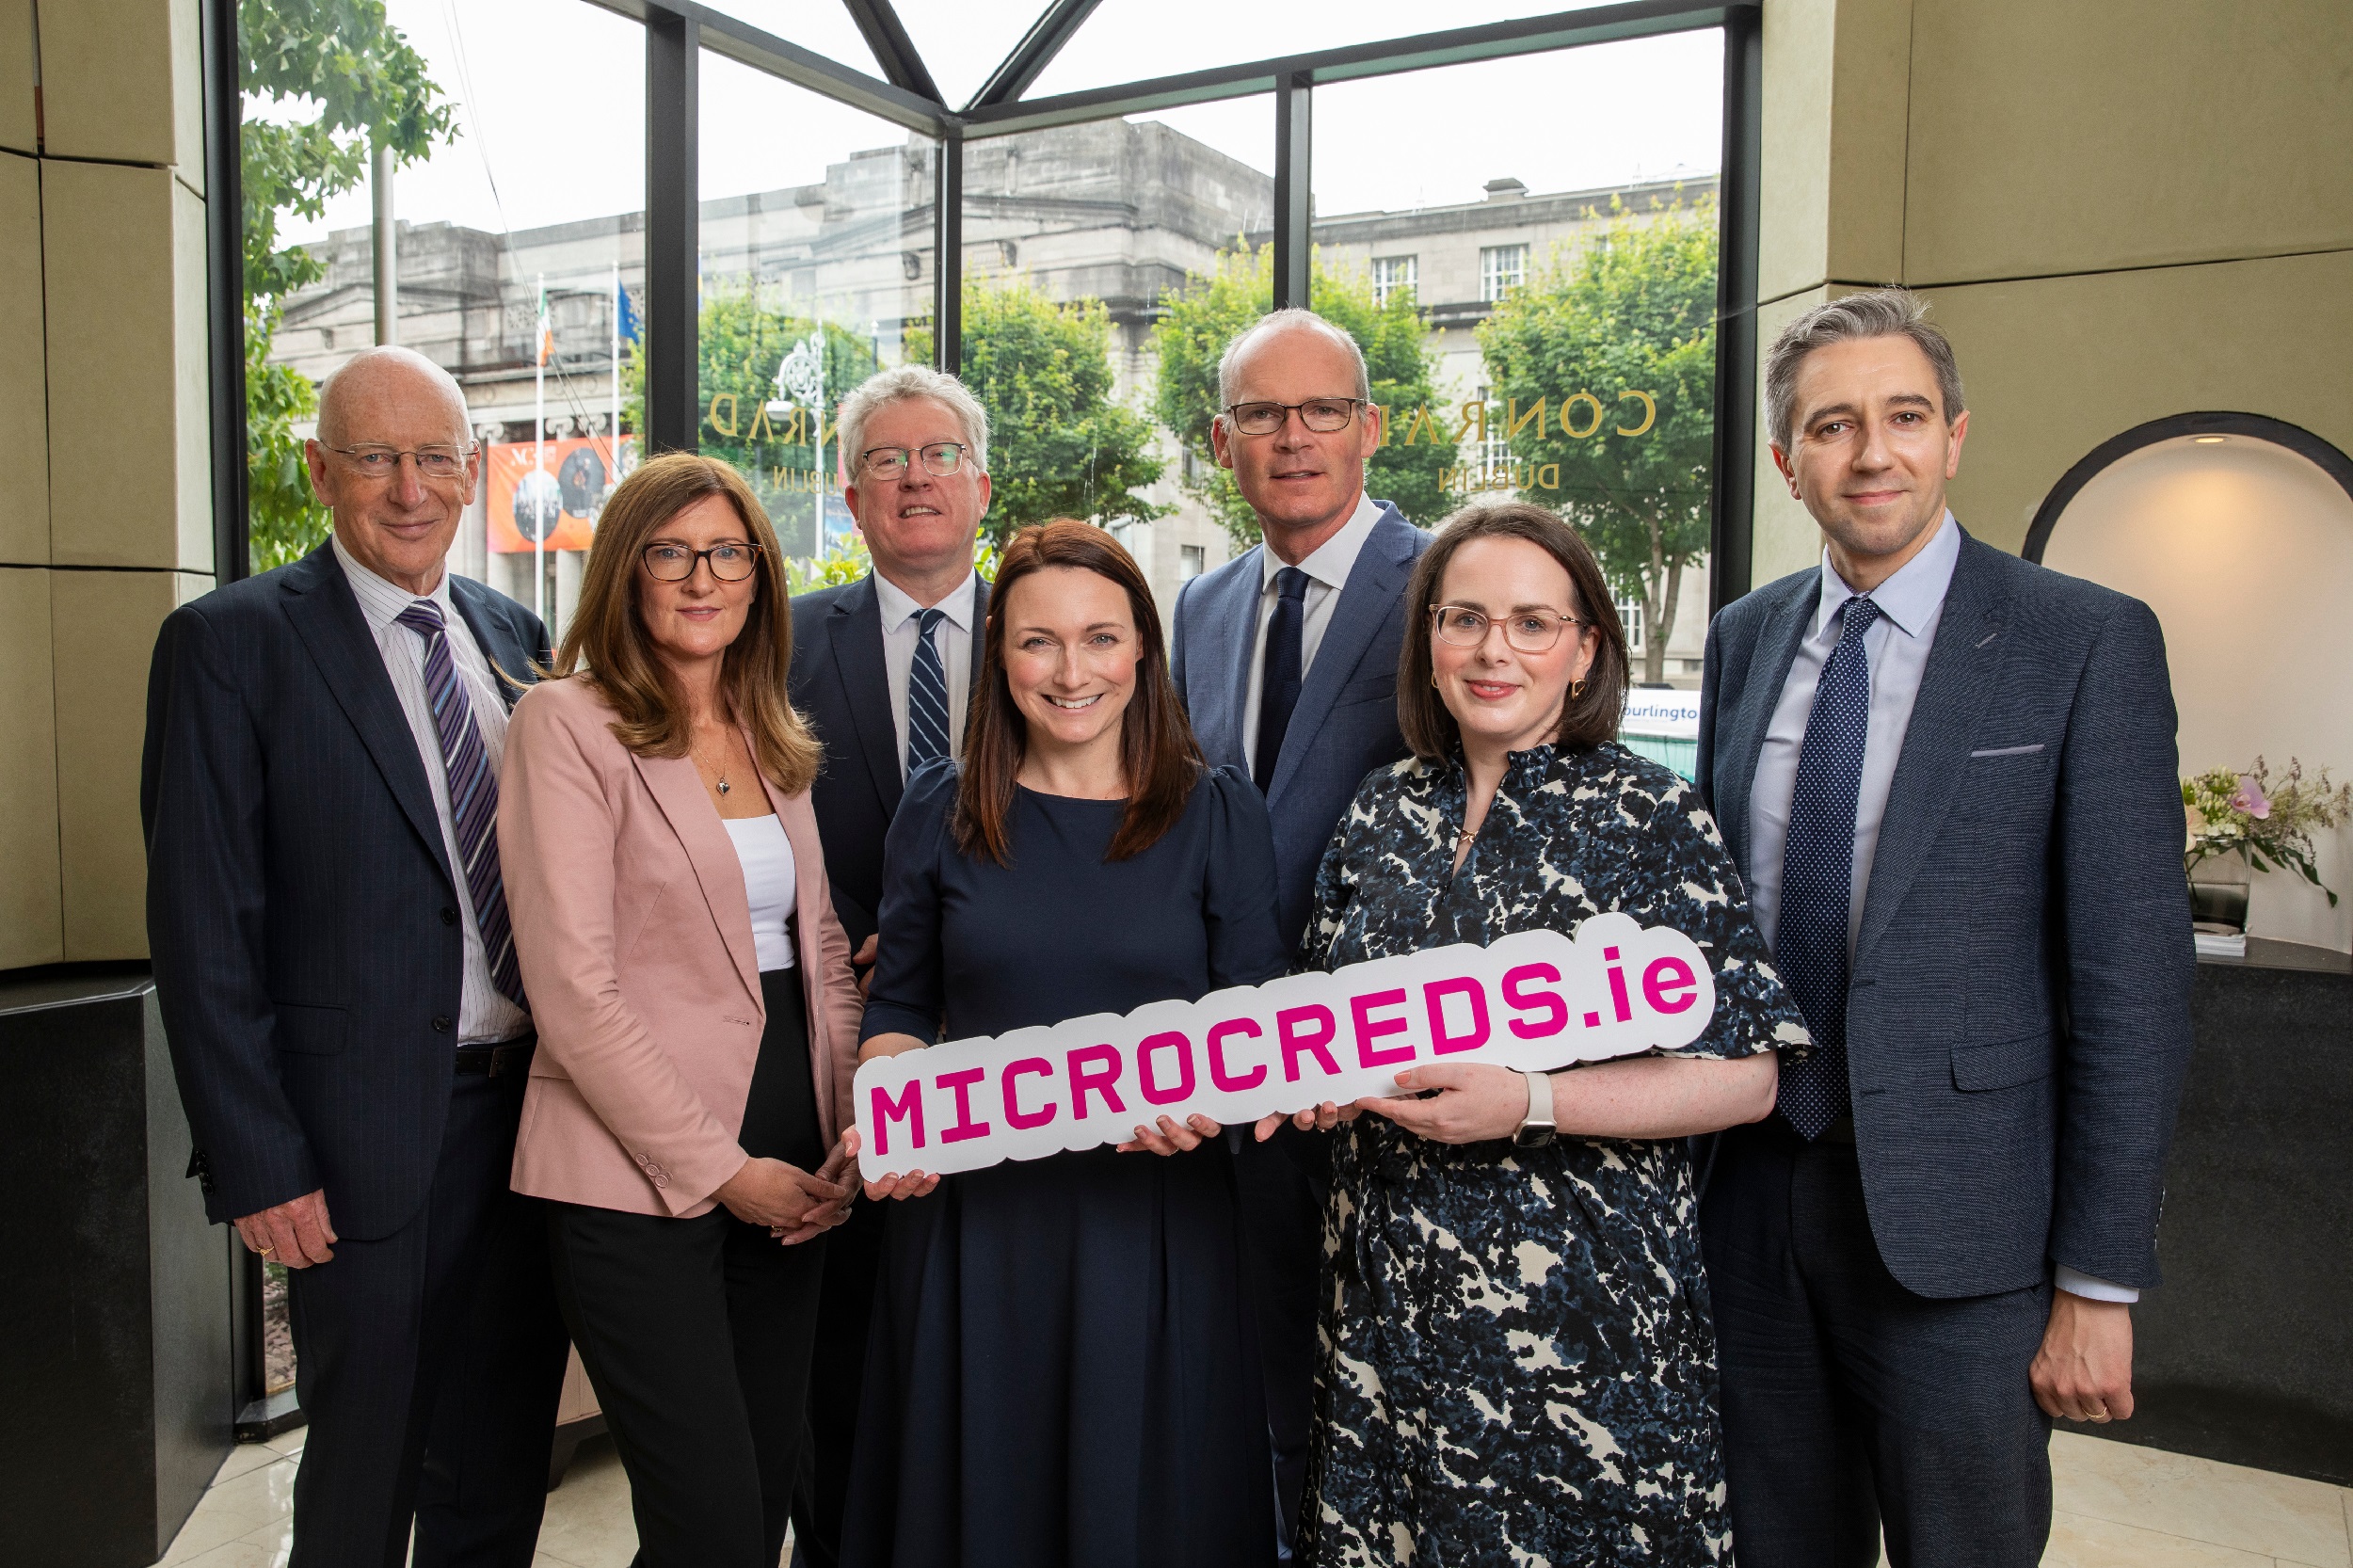 UL awarded funding from MircoCreds.ie, pictured above are Tony Donohue, Chair of the Expert Group on Future Skills Needs, Daire Keogh, President, DCU, Simon Coveney, Minister for Enterprise, Trade and Employment and Simon Harris, Minister for Further and Higher Education, Research, Innovation and Science and (front l-r) Ger Carroll, University of Limerick, Professional Education Manager, Jools O’Connor, IUA MicroCreds Project Lead and Dr Emma Francis, Senior Project Officer for MicroCreds